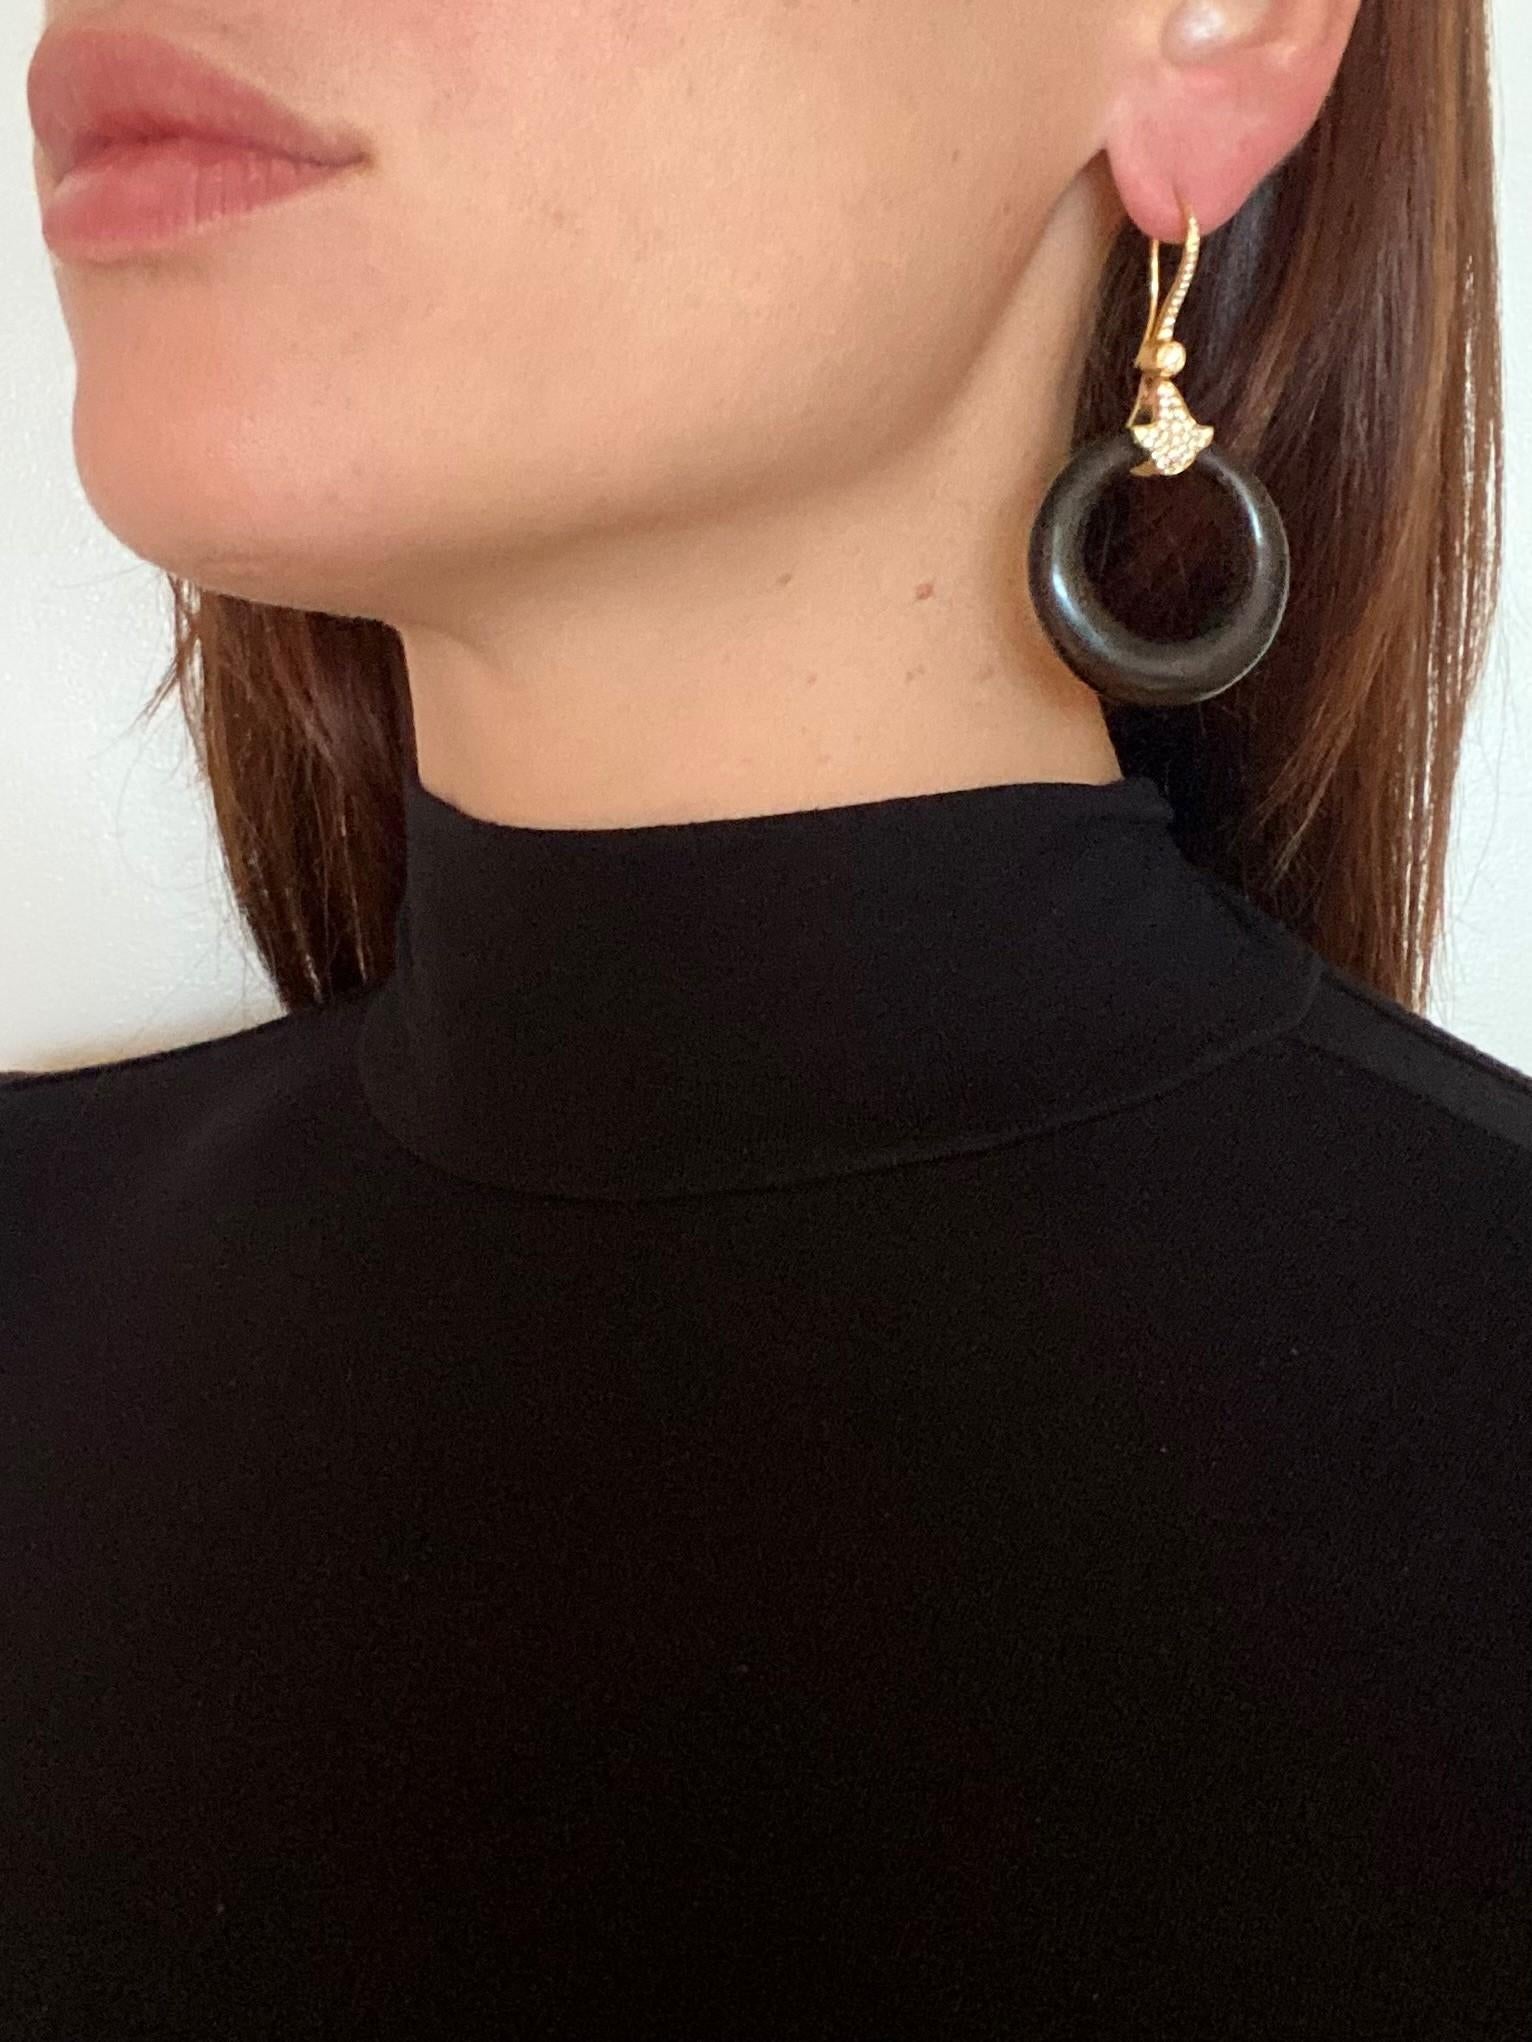 Convertible dangle earrings designed by Marina B.

Gorgeous convertible pair, created in Milano Italy by the jewelry house of Marina Bvlgari. These very versatile diamonds-set hoops earrings has been crafted in solid yellow gold of 18 karats with